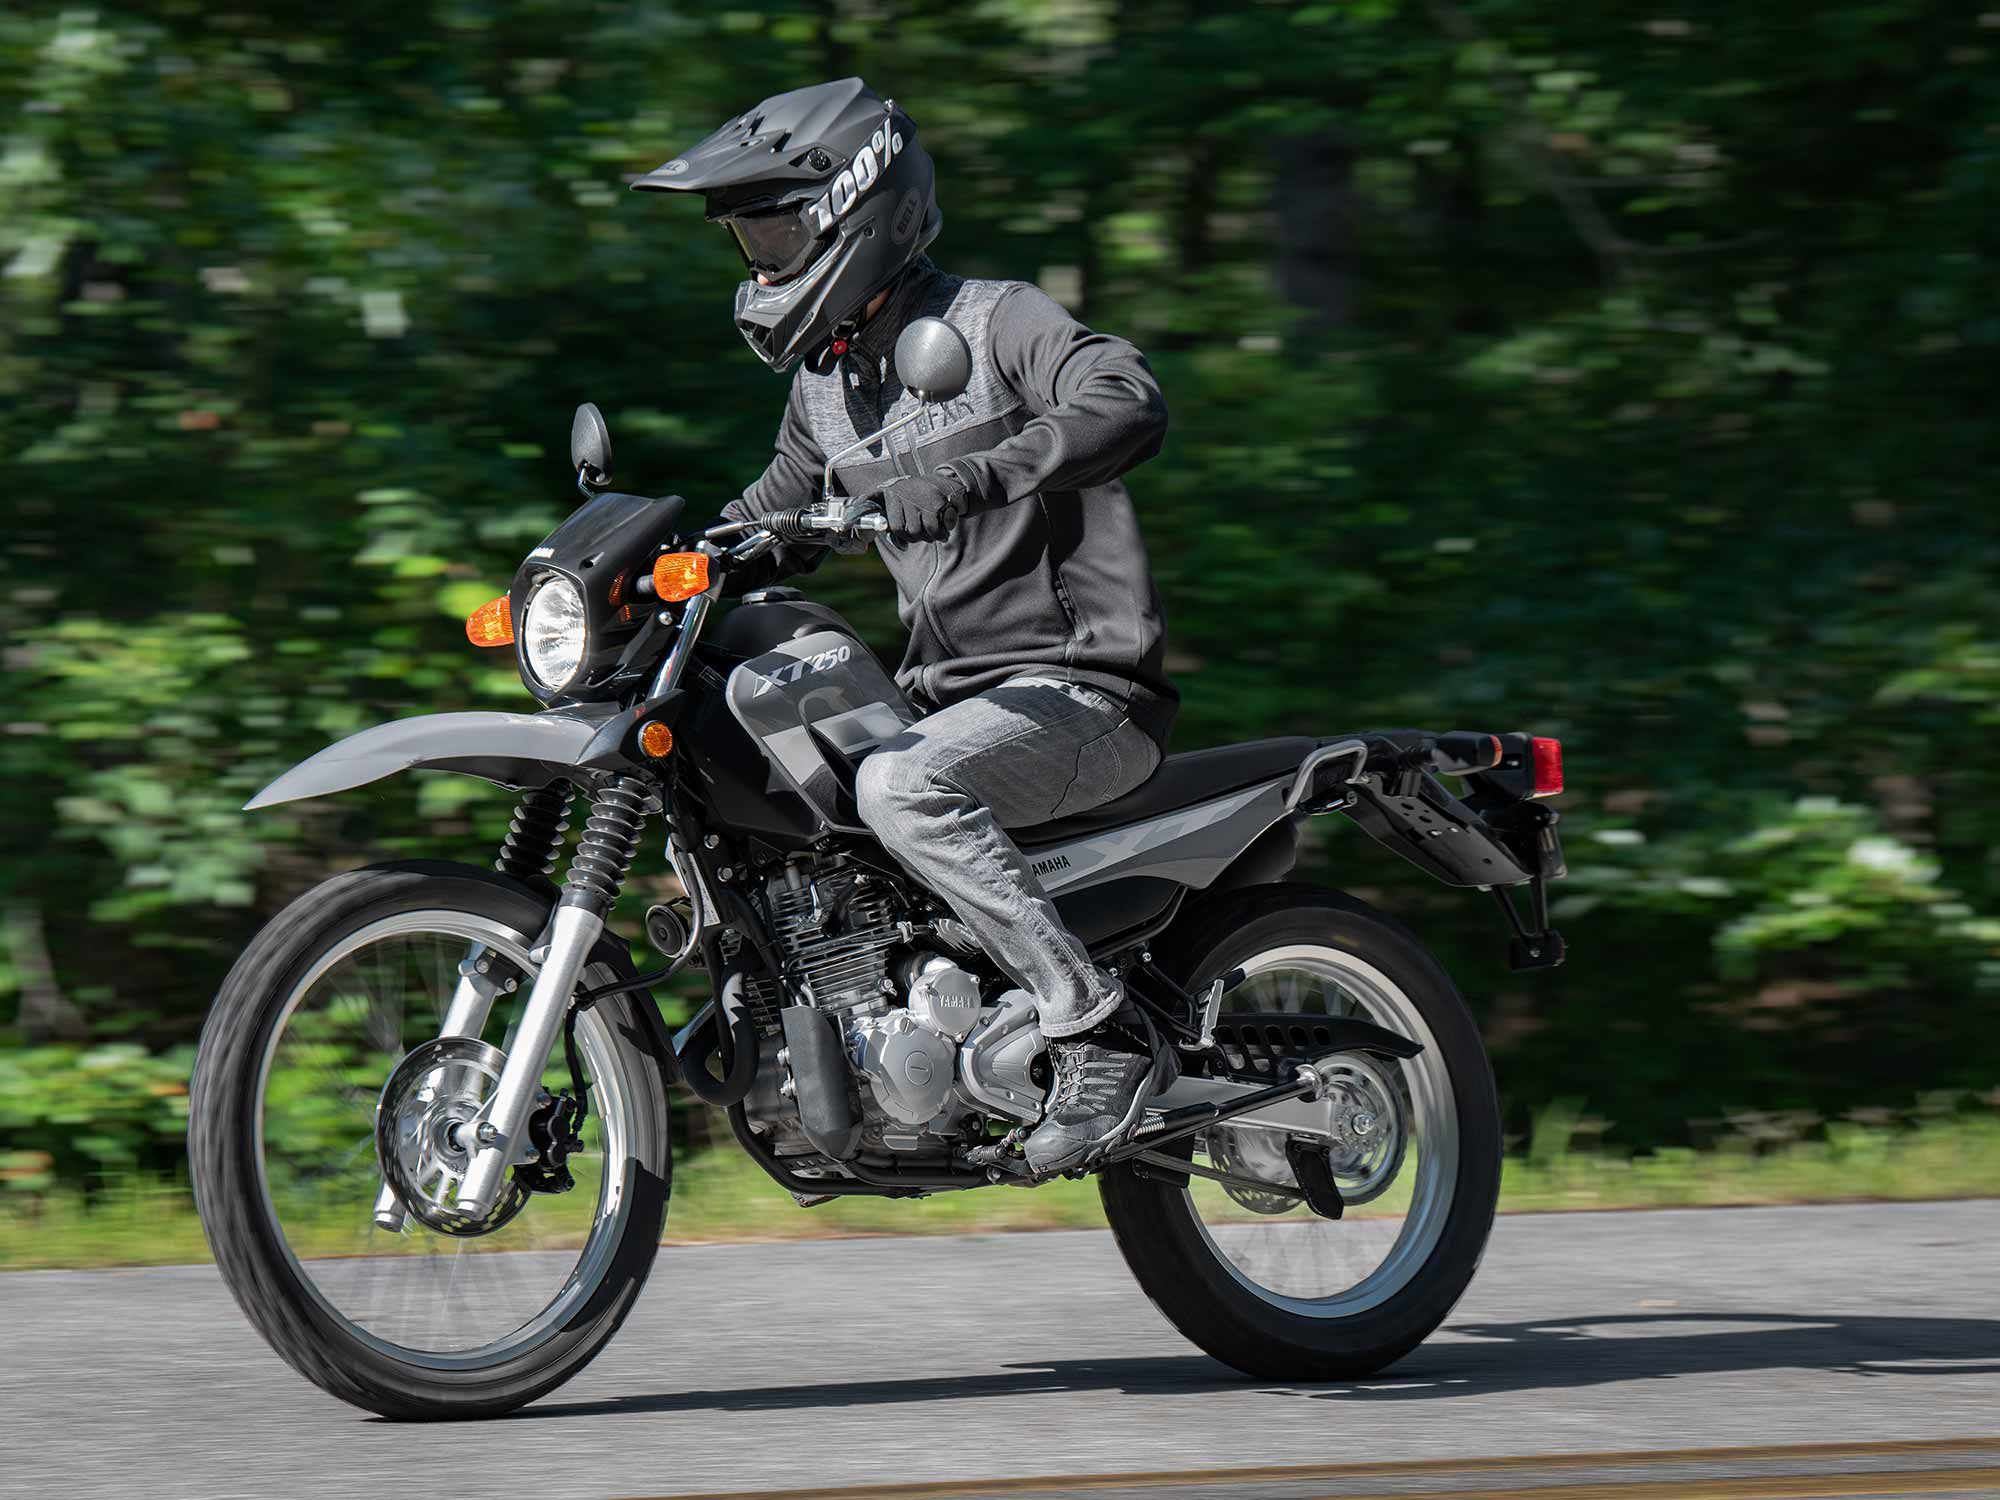 For pure dual sport bliss, check out the Yamaha XT250.